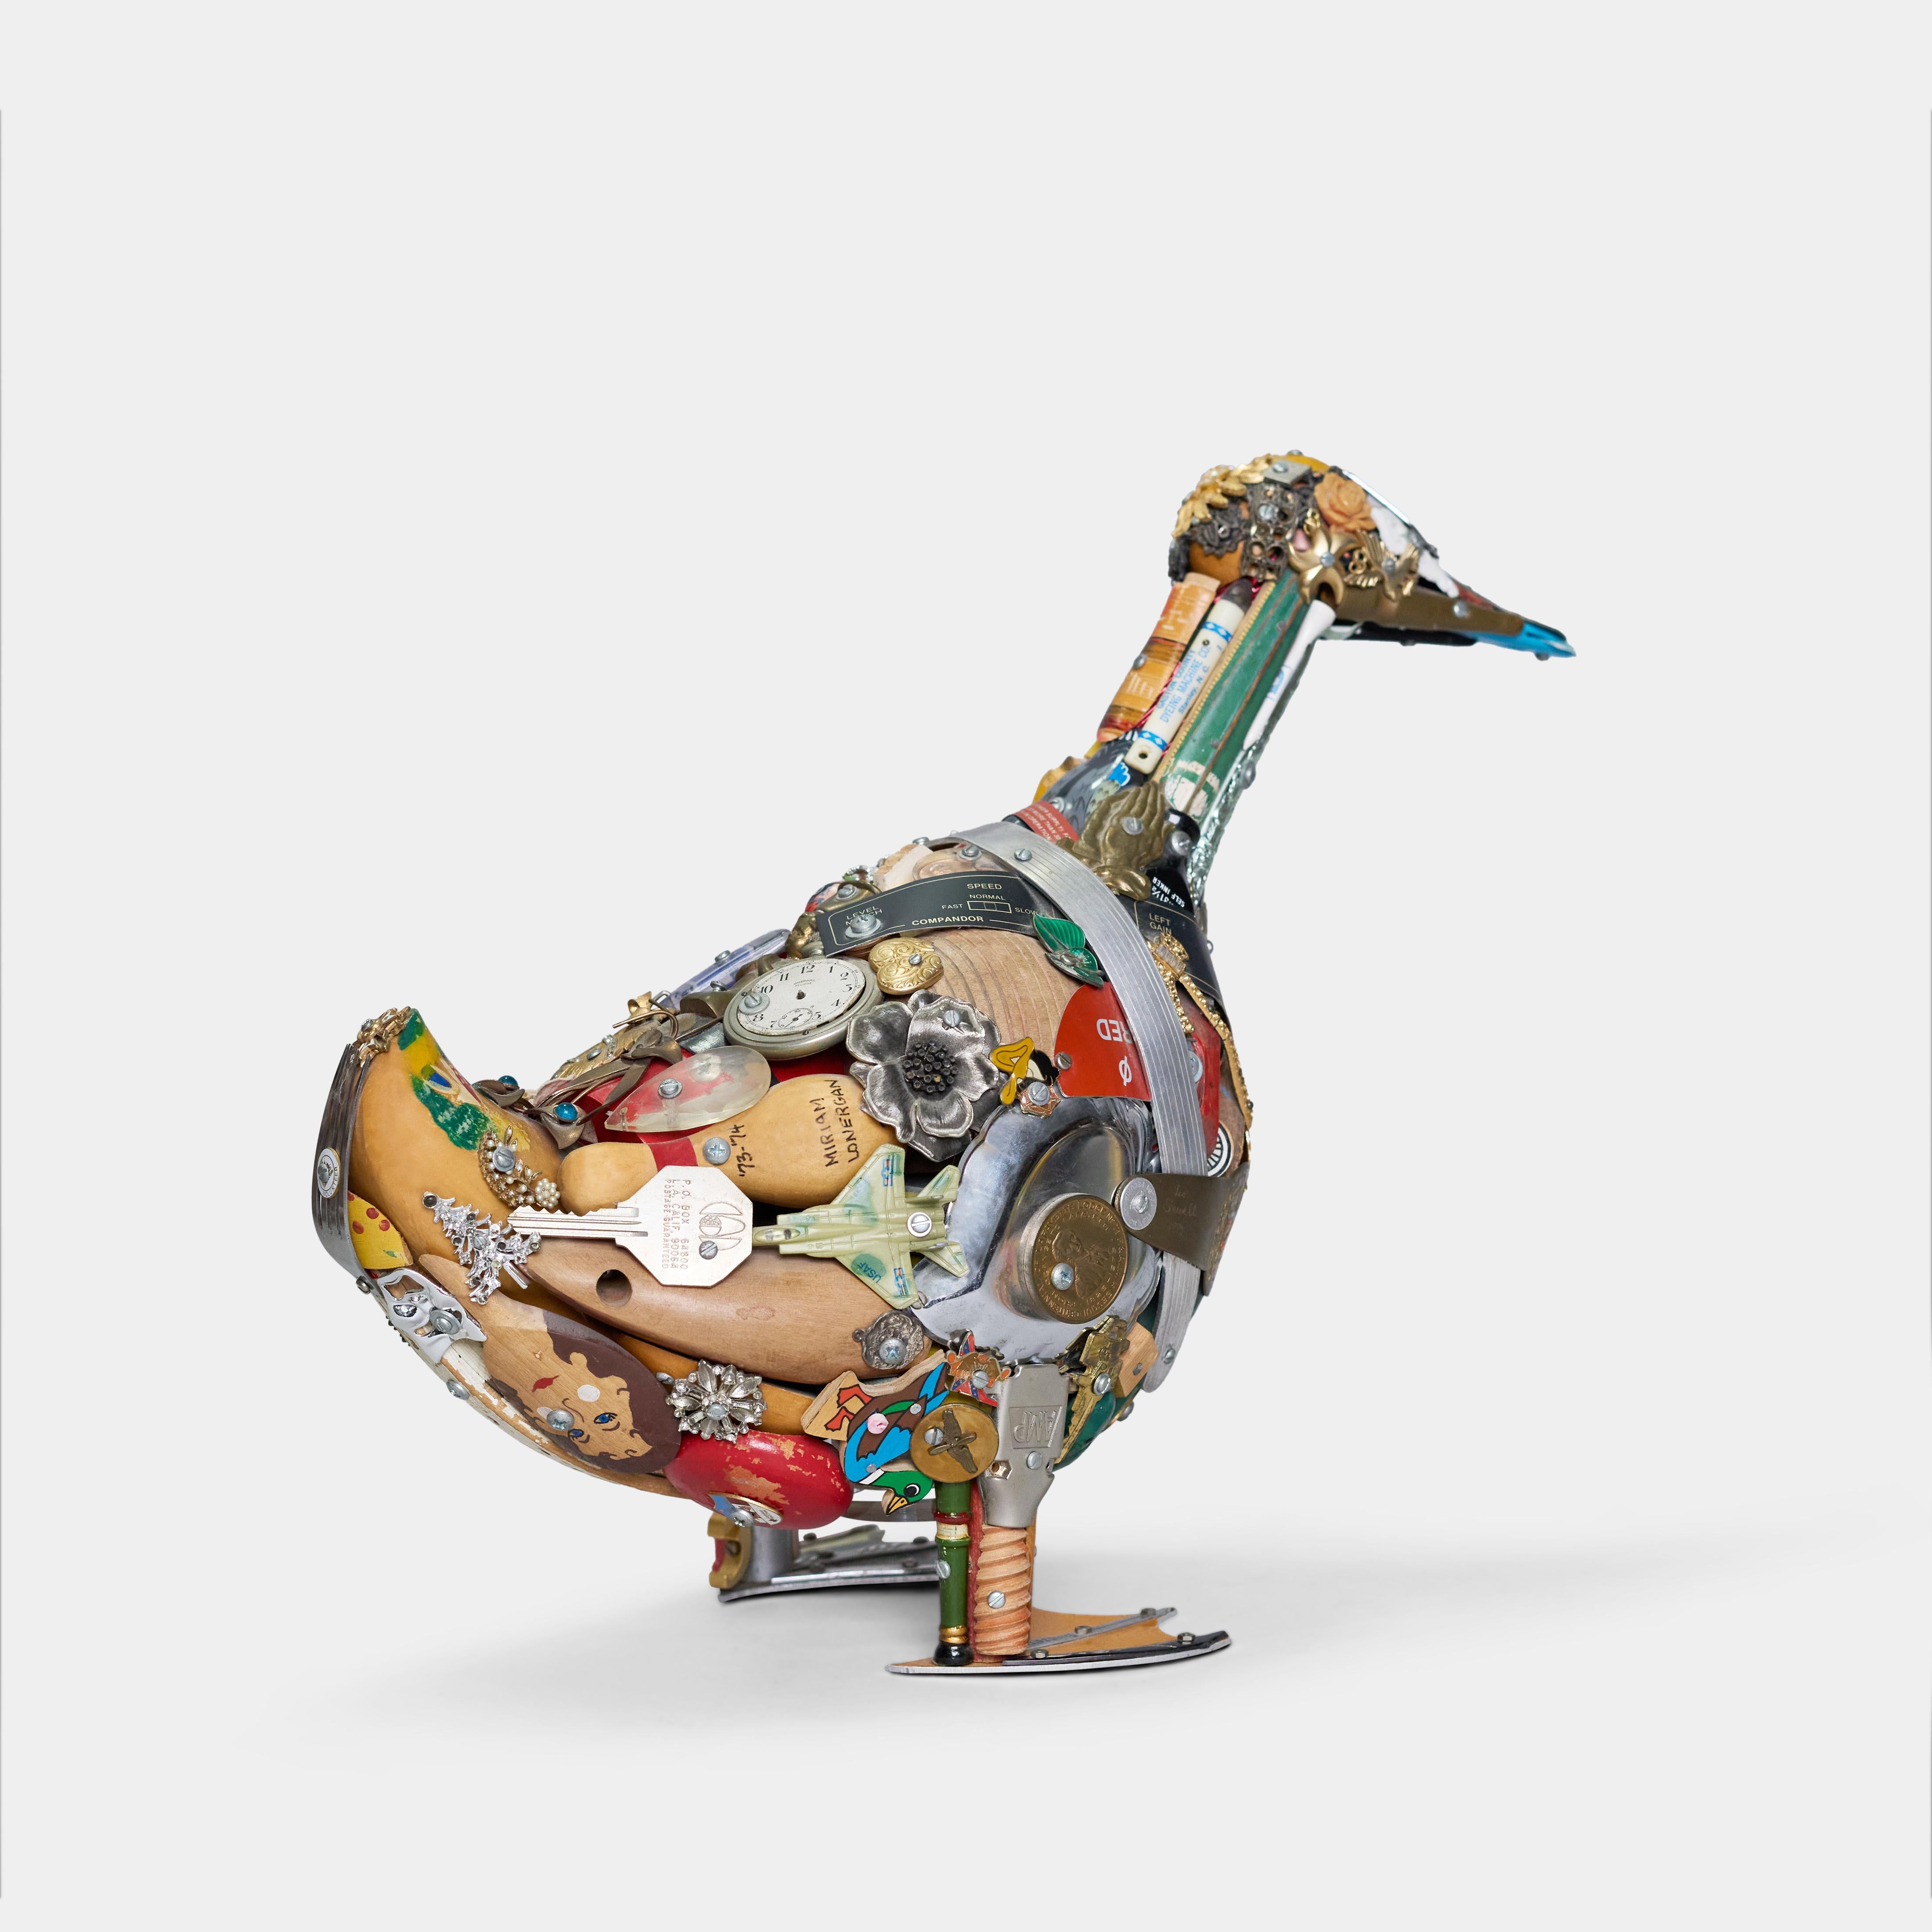 A wonderful Mixed media sculpture of a duck by the noted Philadelphia artist Leo Sewell. This is an early example from the Master of found objects. He worked with recycled objects to create his sculpture and his works are unique and particularly